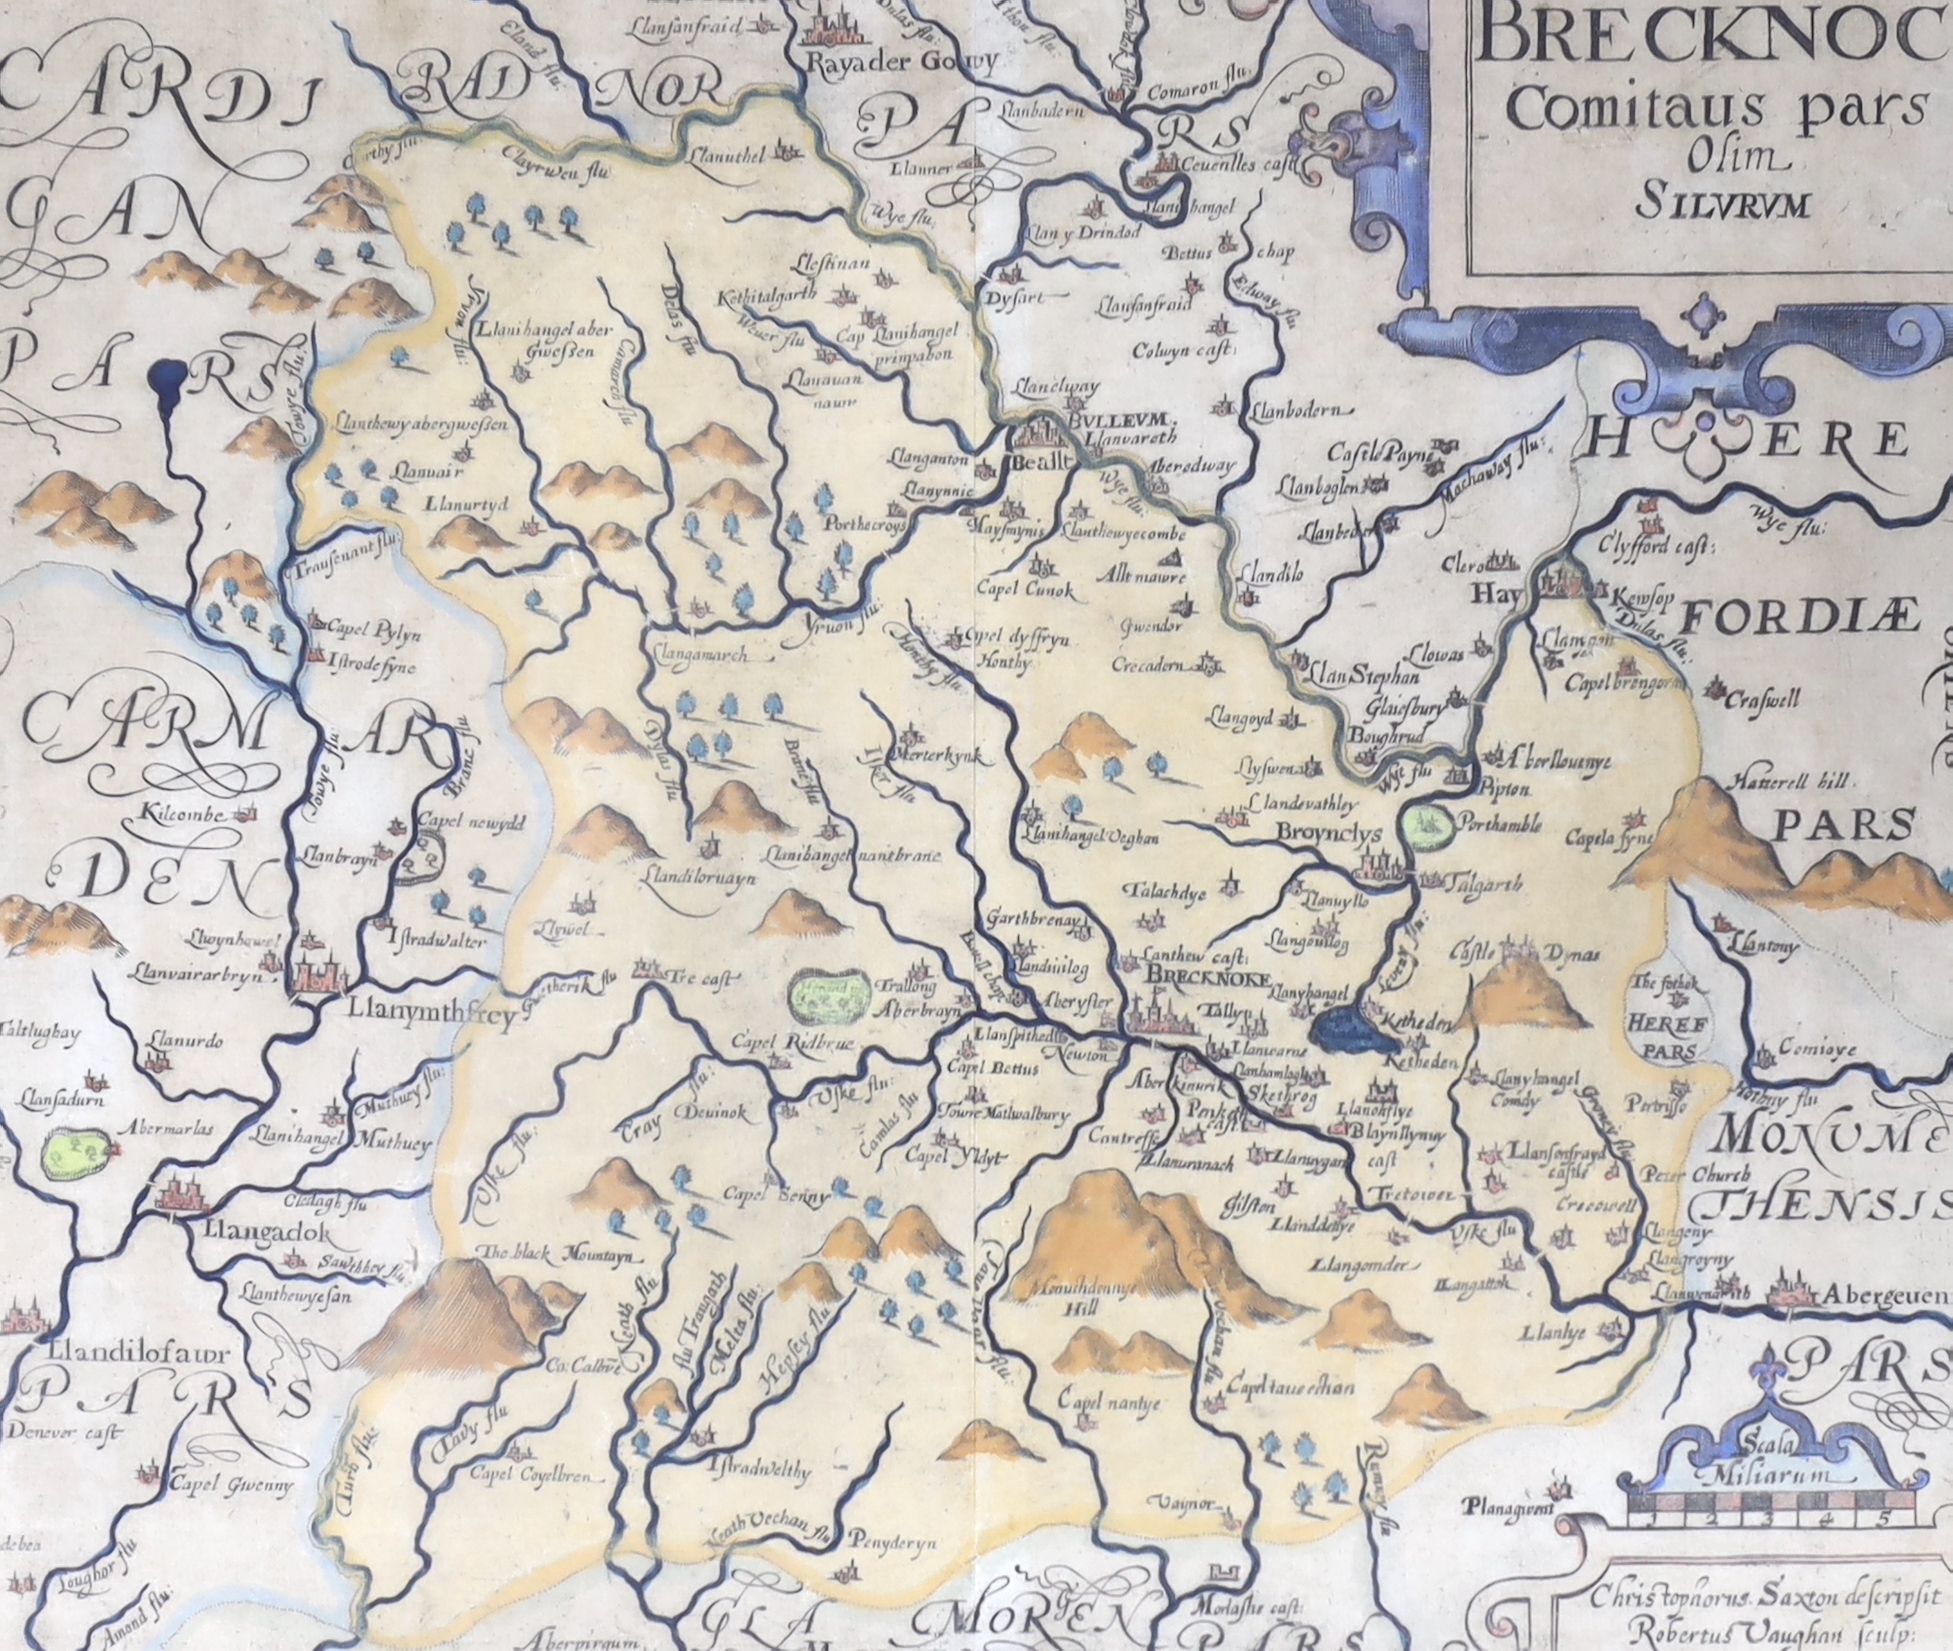 Christopher Saxton (c.1540- c.1610) and Robert Vaughan, hand-coloured map of Brecknoc (Brecknockshire), 1607, unframed, 29 x 33cm